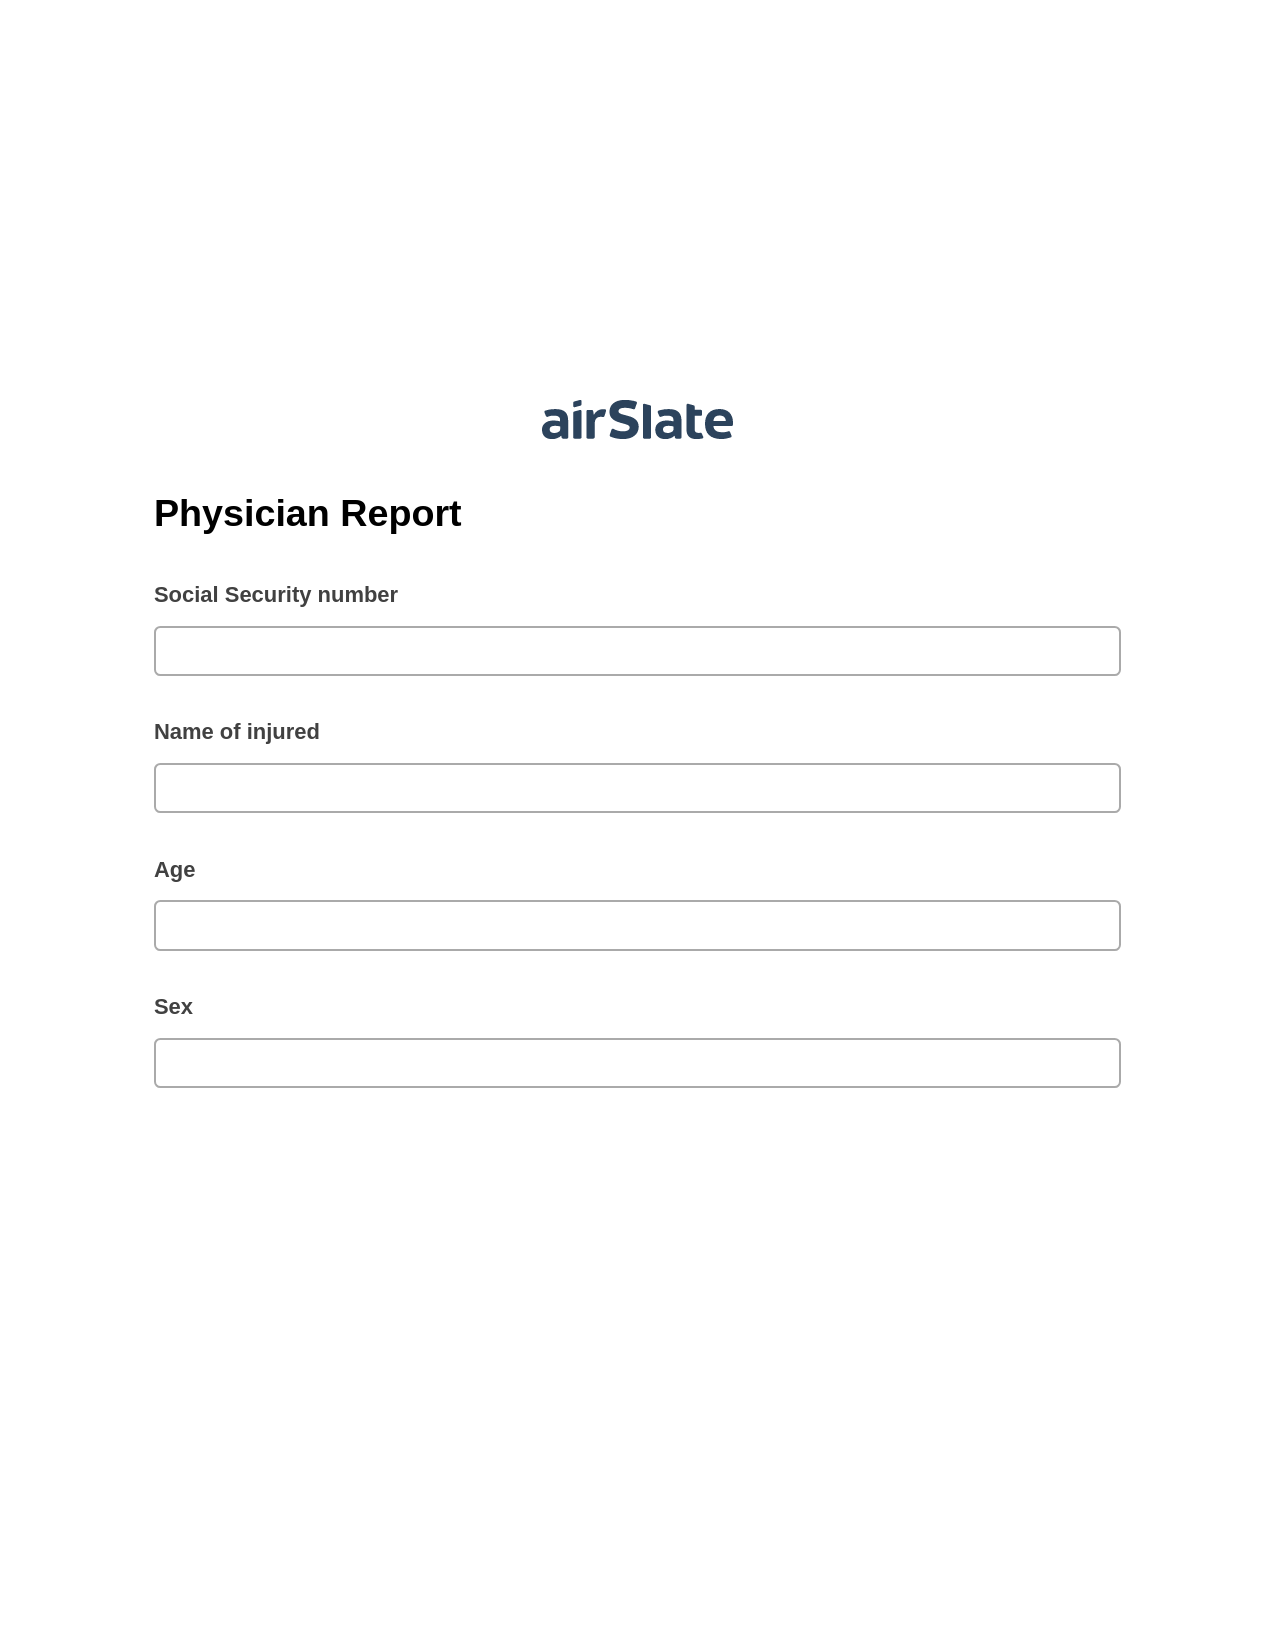 Multirole Physician Report Pre-fill from CSV File Bot, Lock the Slate Bot, Post-finish Document Bot